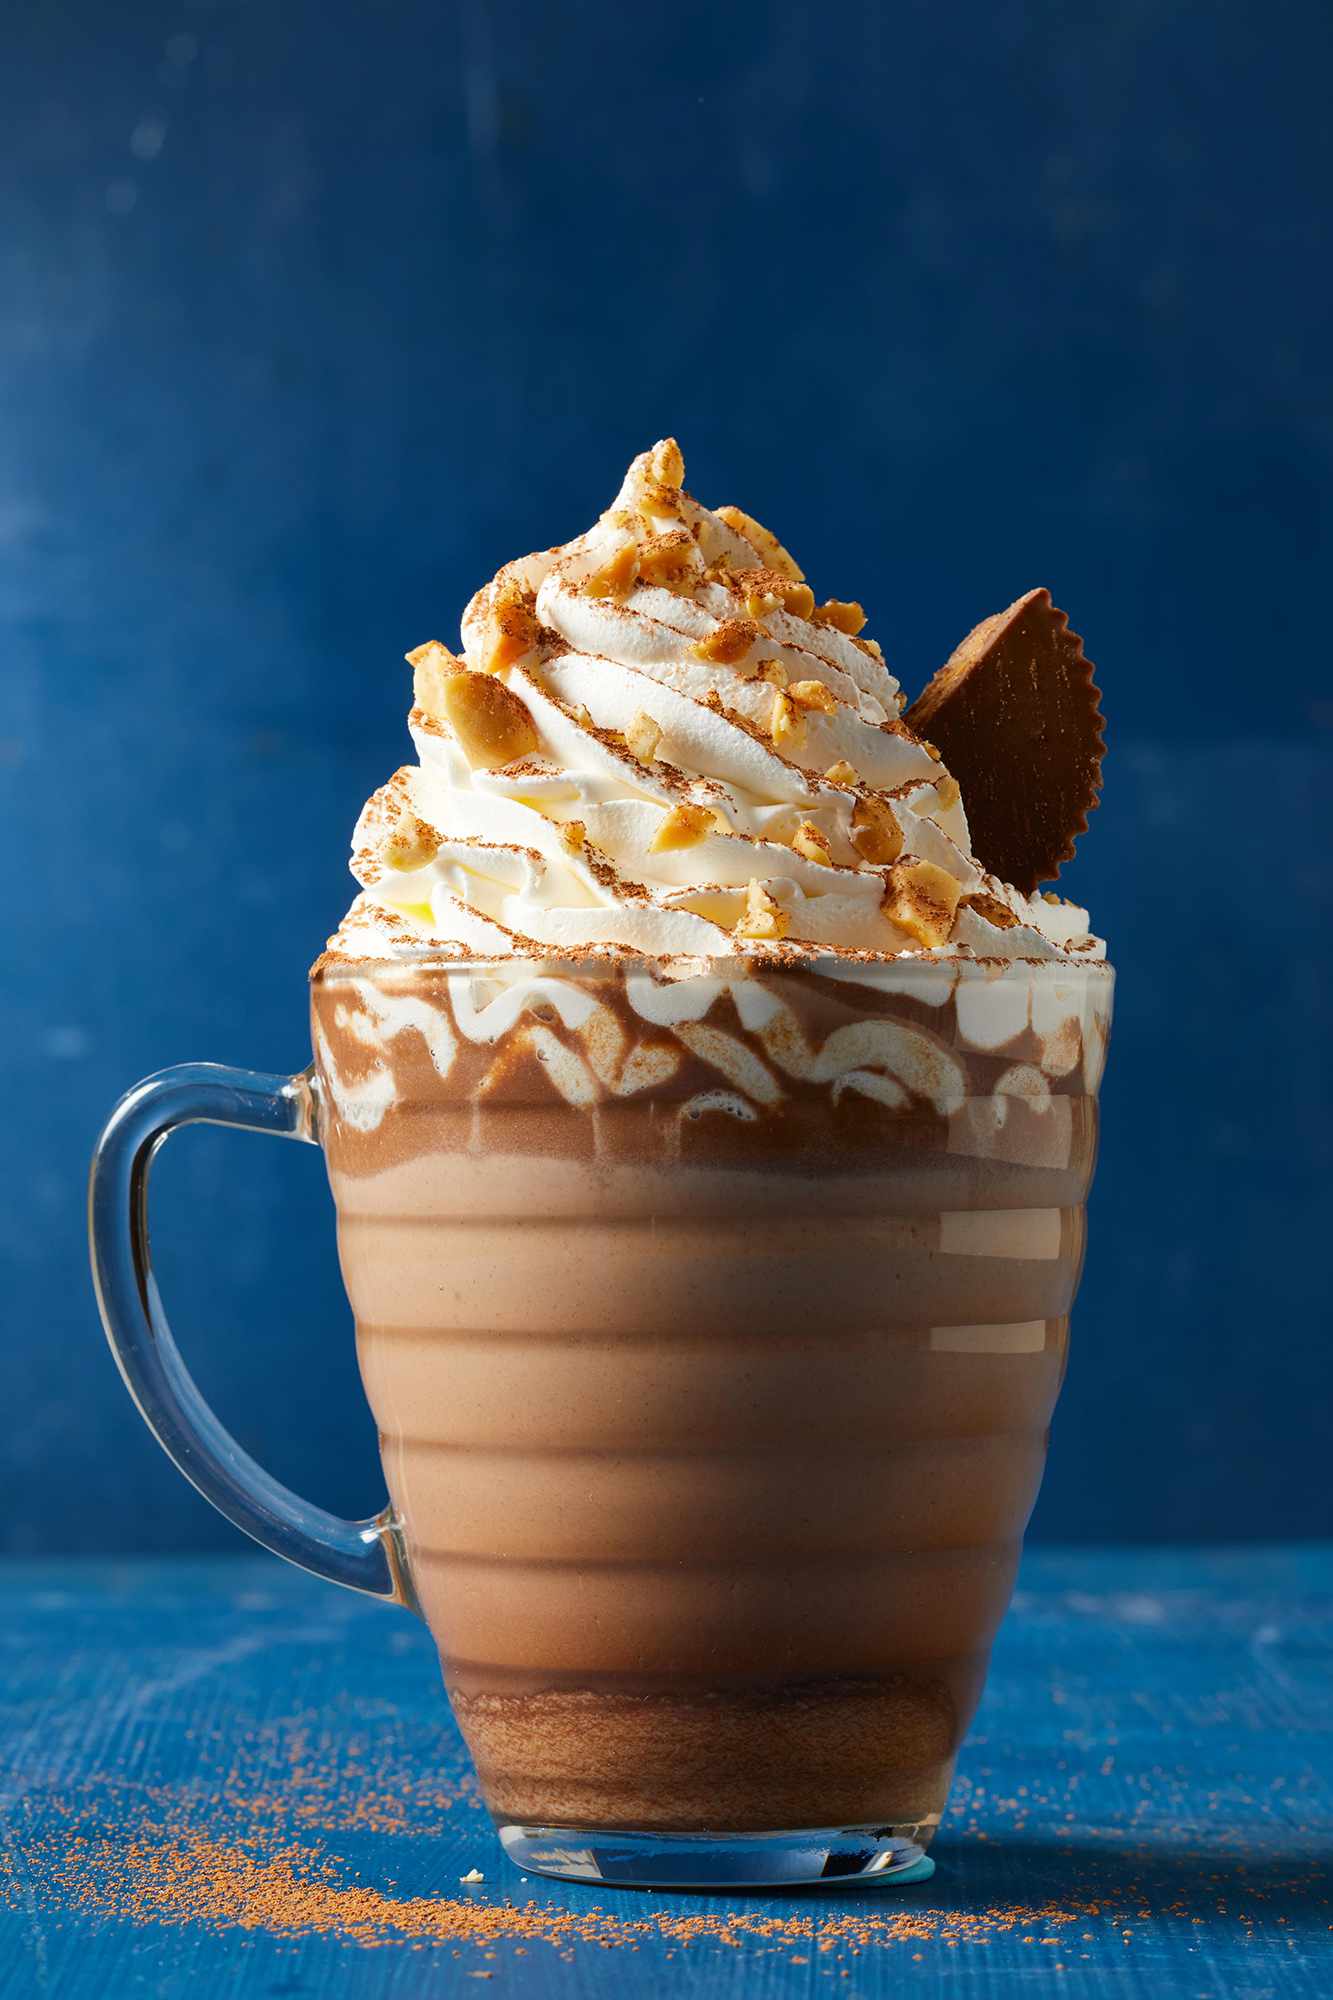 Peanut Butter Cup Hot Chocolate